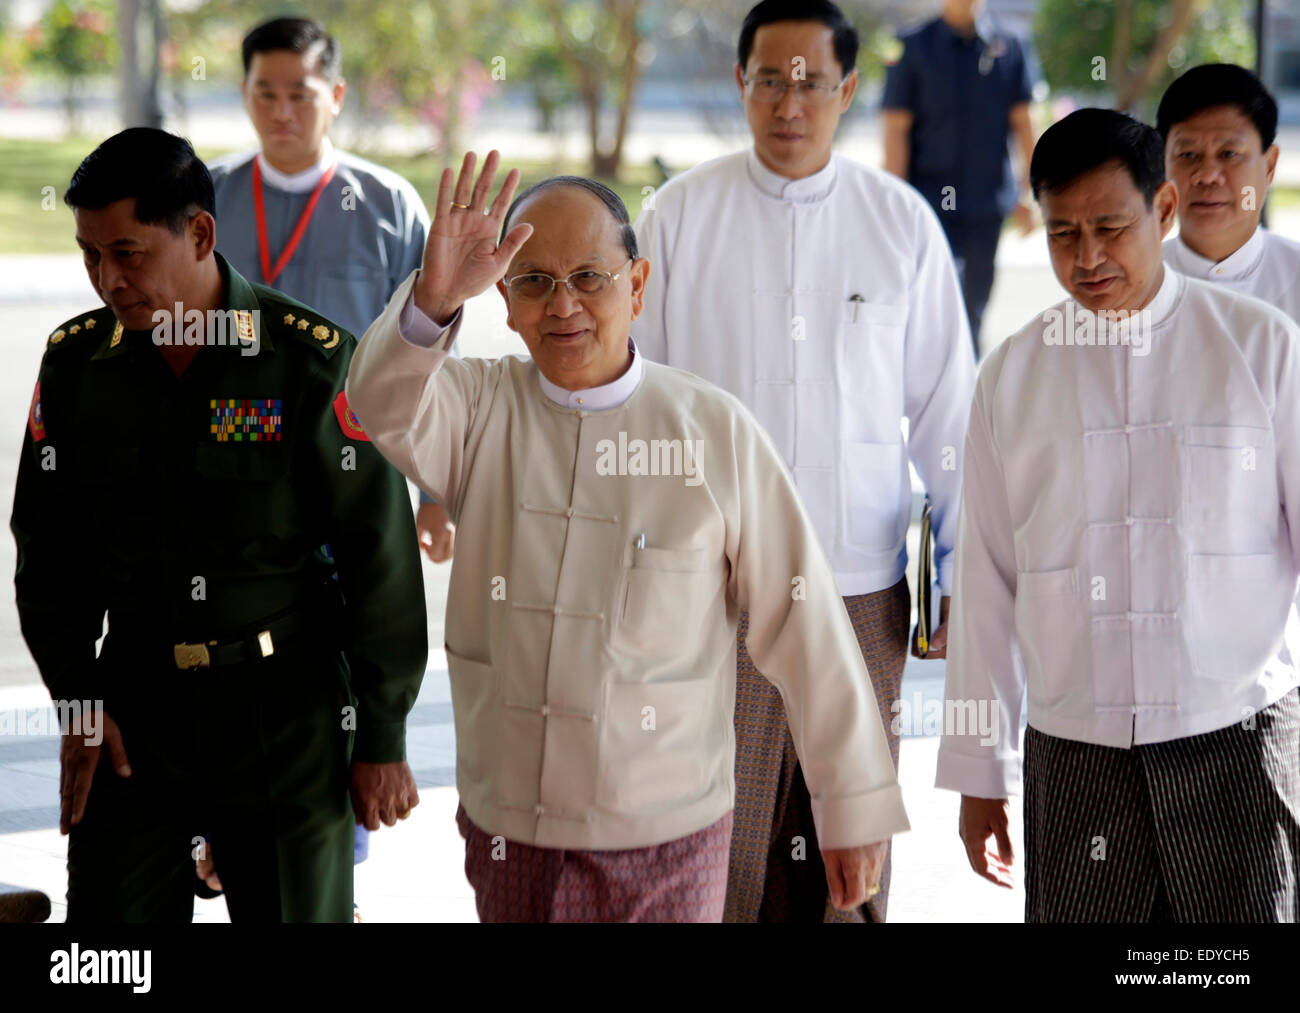 Nay Pyi Taw, Myanmar. 12th Jan, 2015. Myanmar President U Thein Sein (C) arrives to attend the meeting with leaders of political forces at the Presidential Palace in Nay Pyi Taw, Myanmar, Jan. 12, 2015. Myanmar President U Thein Sein met some leaders of the country's political forces here Monday morning for discussions on major domestic issues concerning peace and development. © U Aung/Xinhua/Alamy Live News Stock Photo